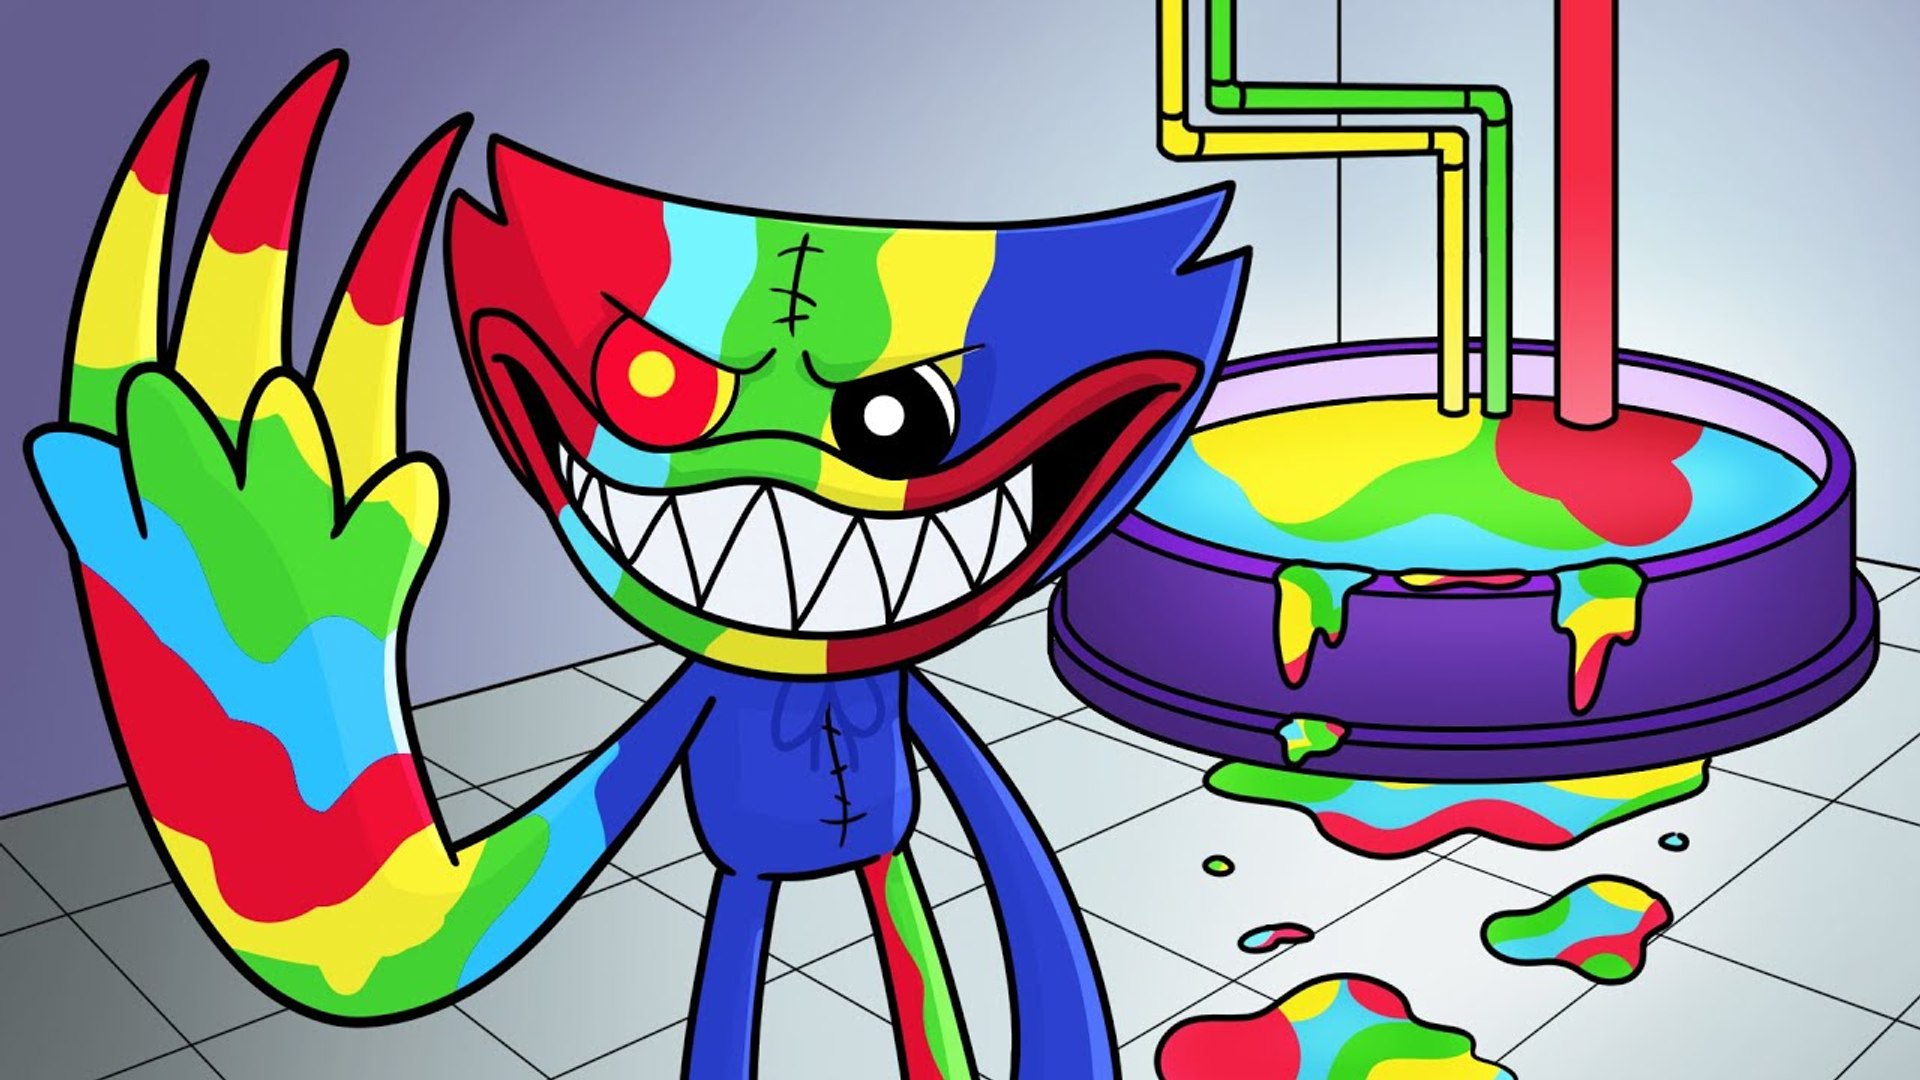 Rainbow friends character drawing(Blue and Pink) - video Dailymotion